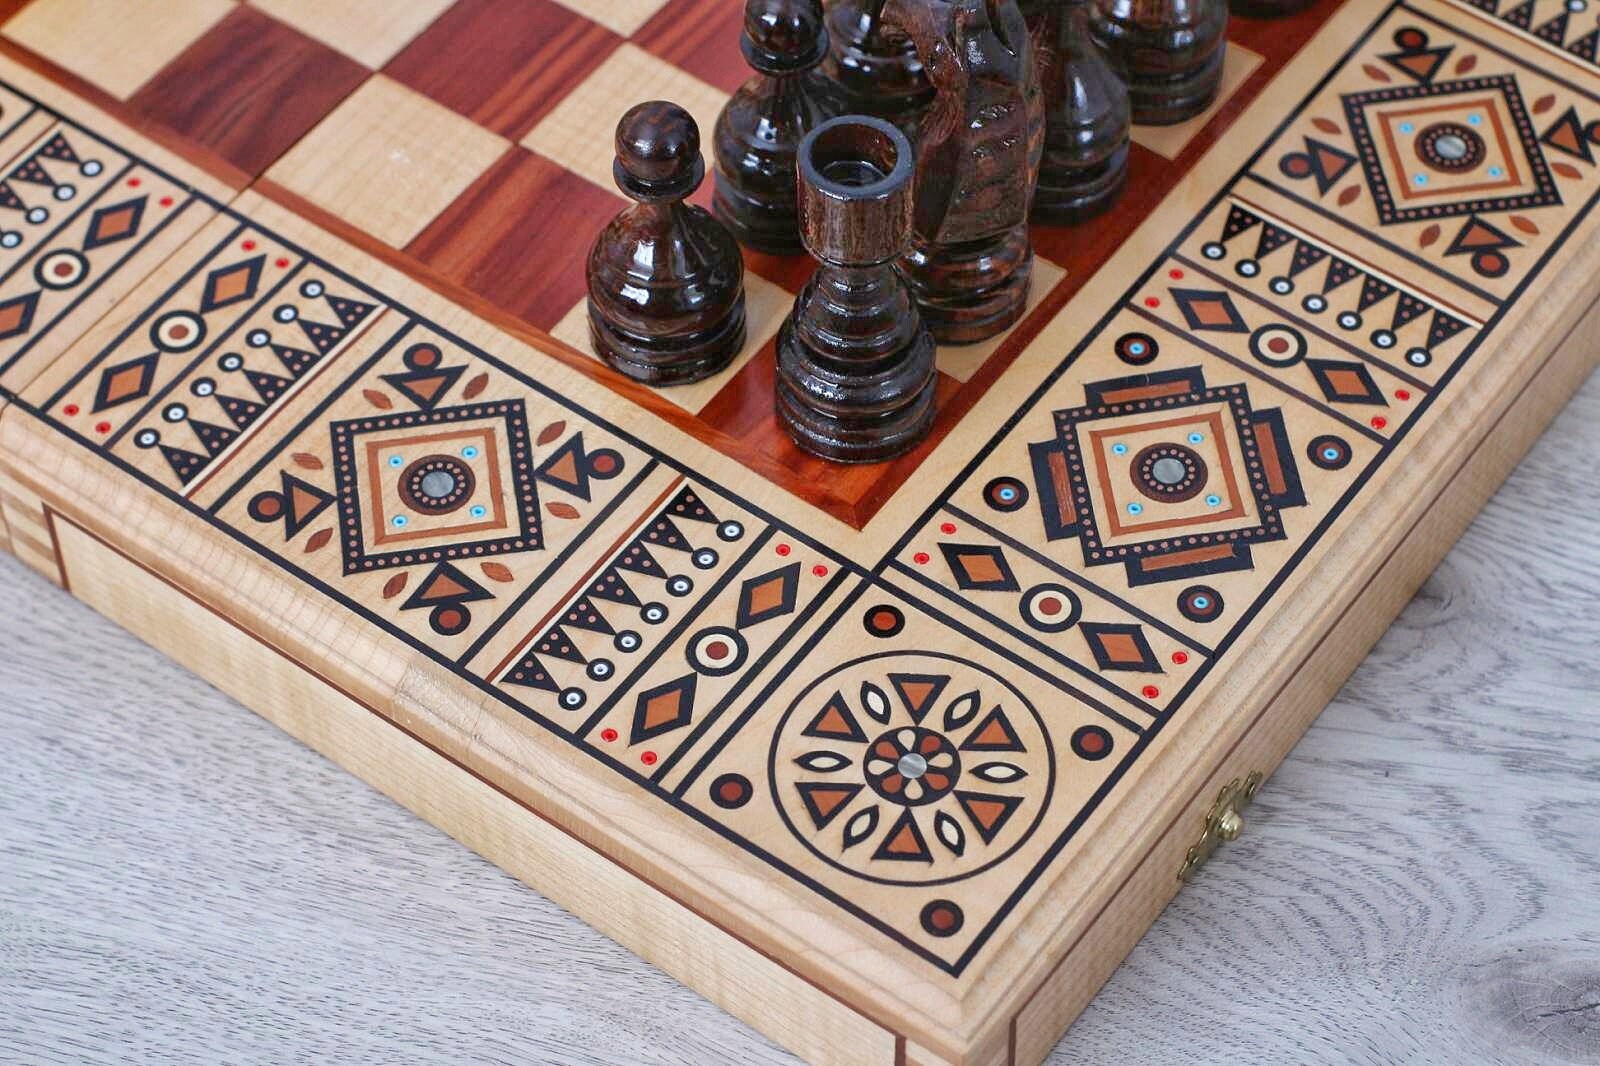 Deluxe Walnut and Maple Chess Board - 54cm